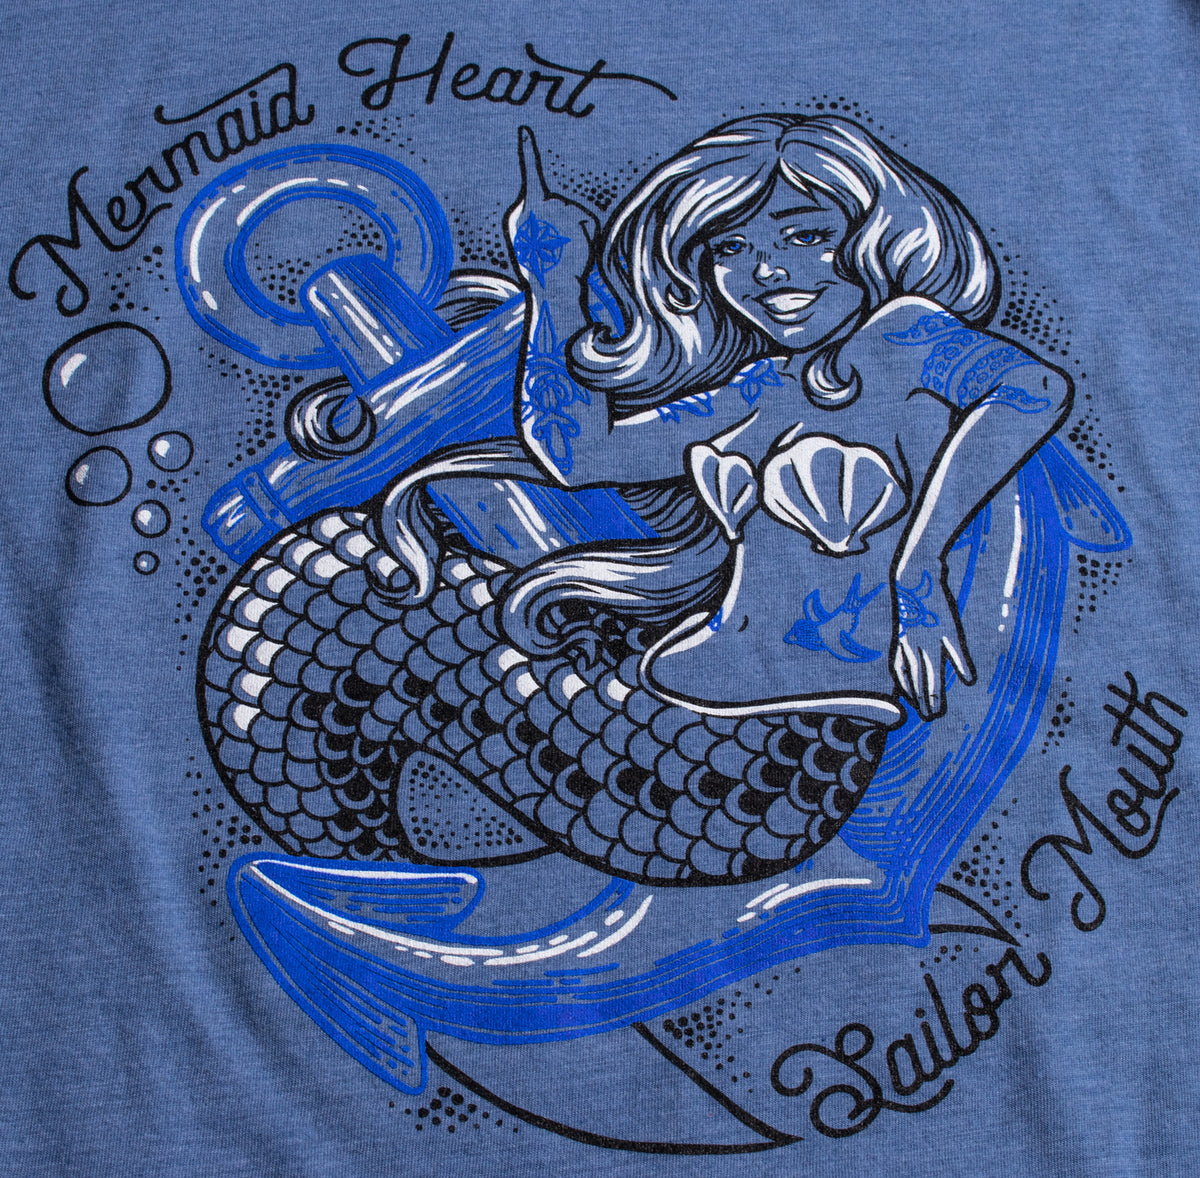 Mermaid Heart, Sailor Mouth | Cute Funny Sassy Sarcastic V-neck T-shirt for Women